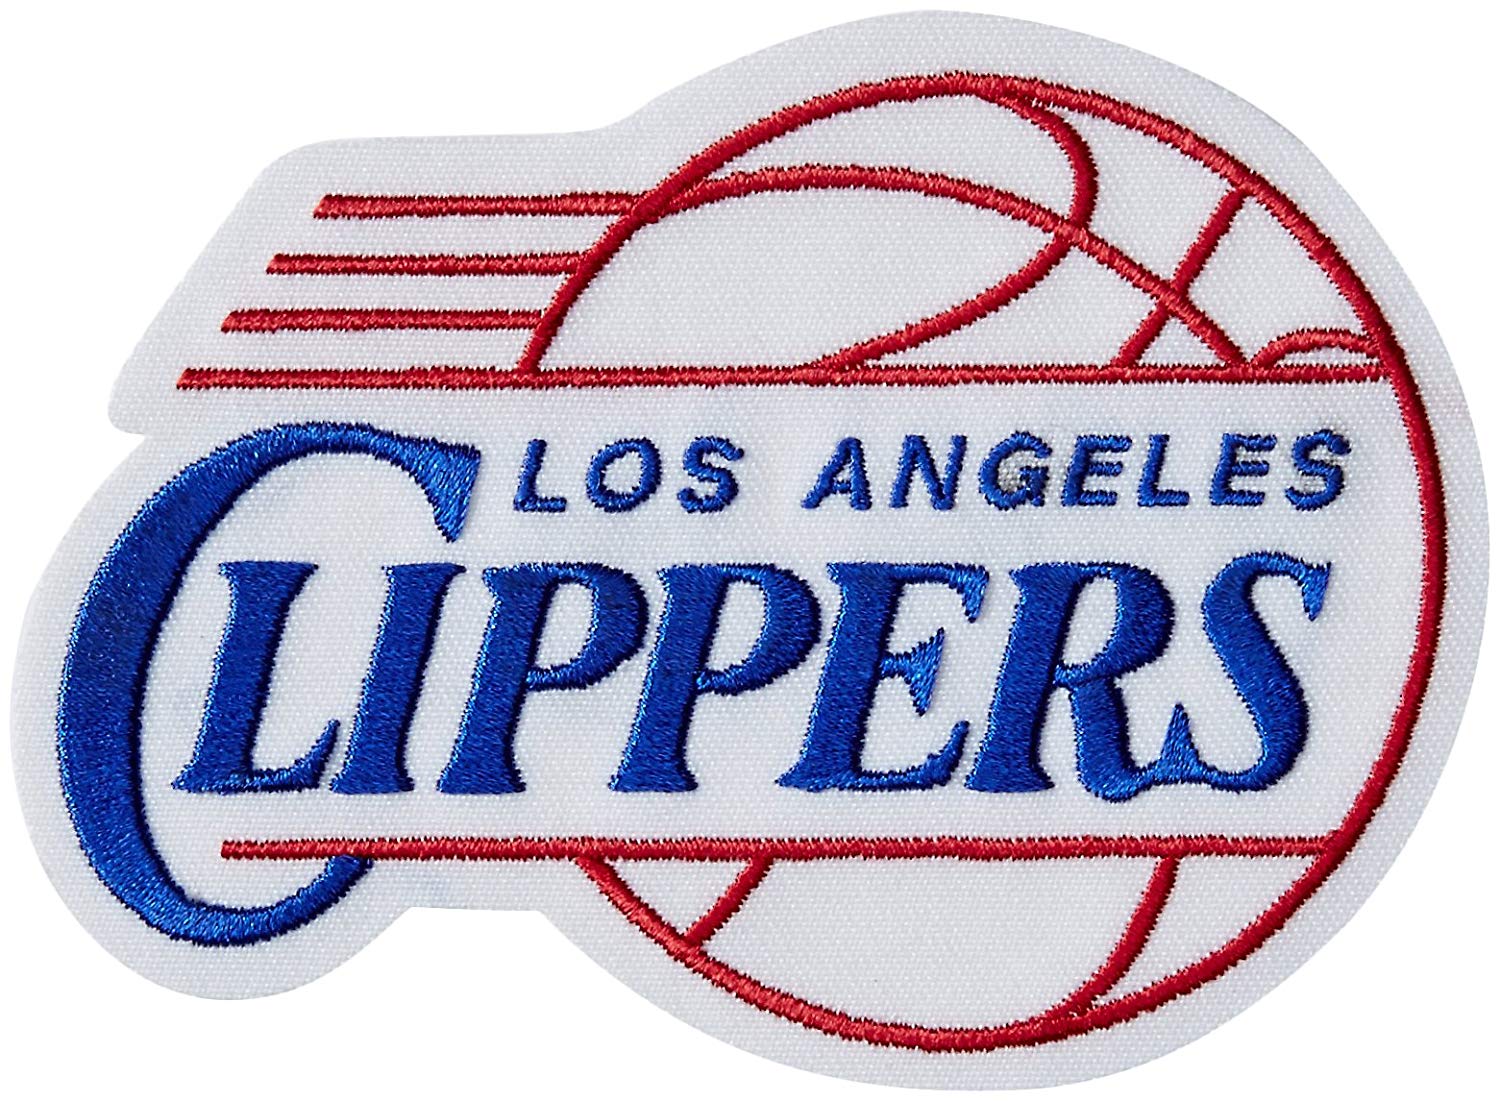 Clippers Logo - Amazon.com: Los Angeles Clippers Logo Patch: Sports & Outdoors